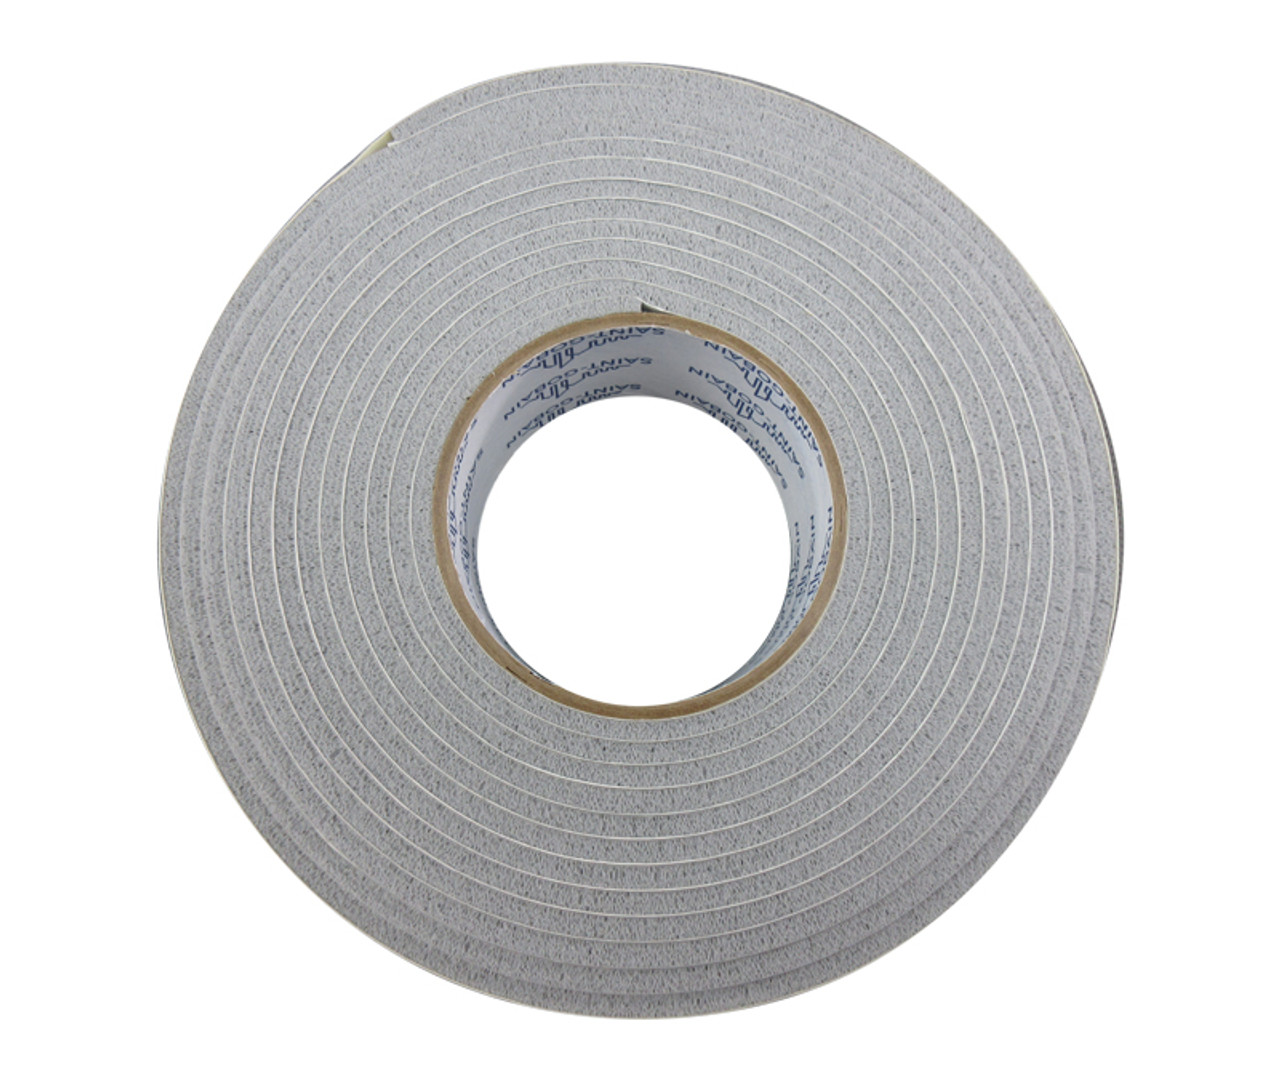 3/4 Double-Sided Adhesive Foam Tape - Roll